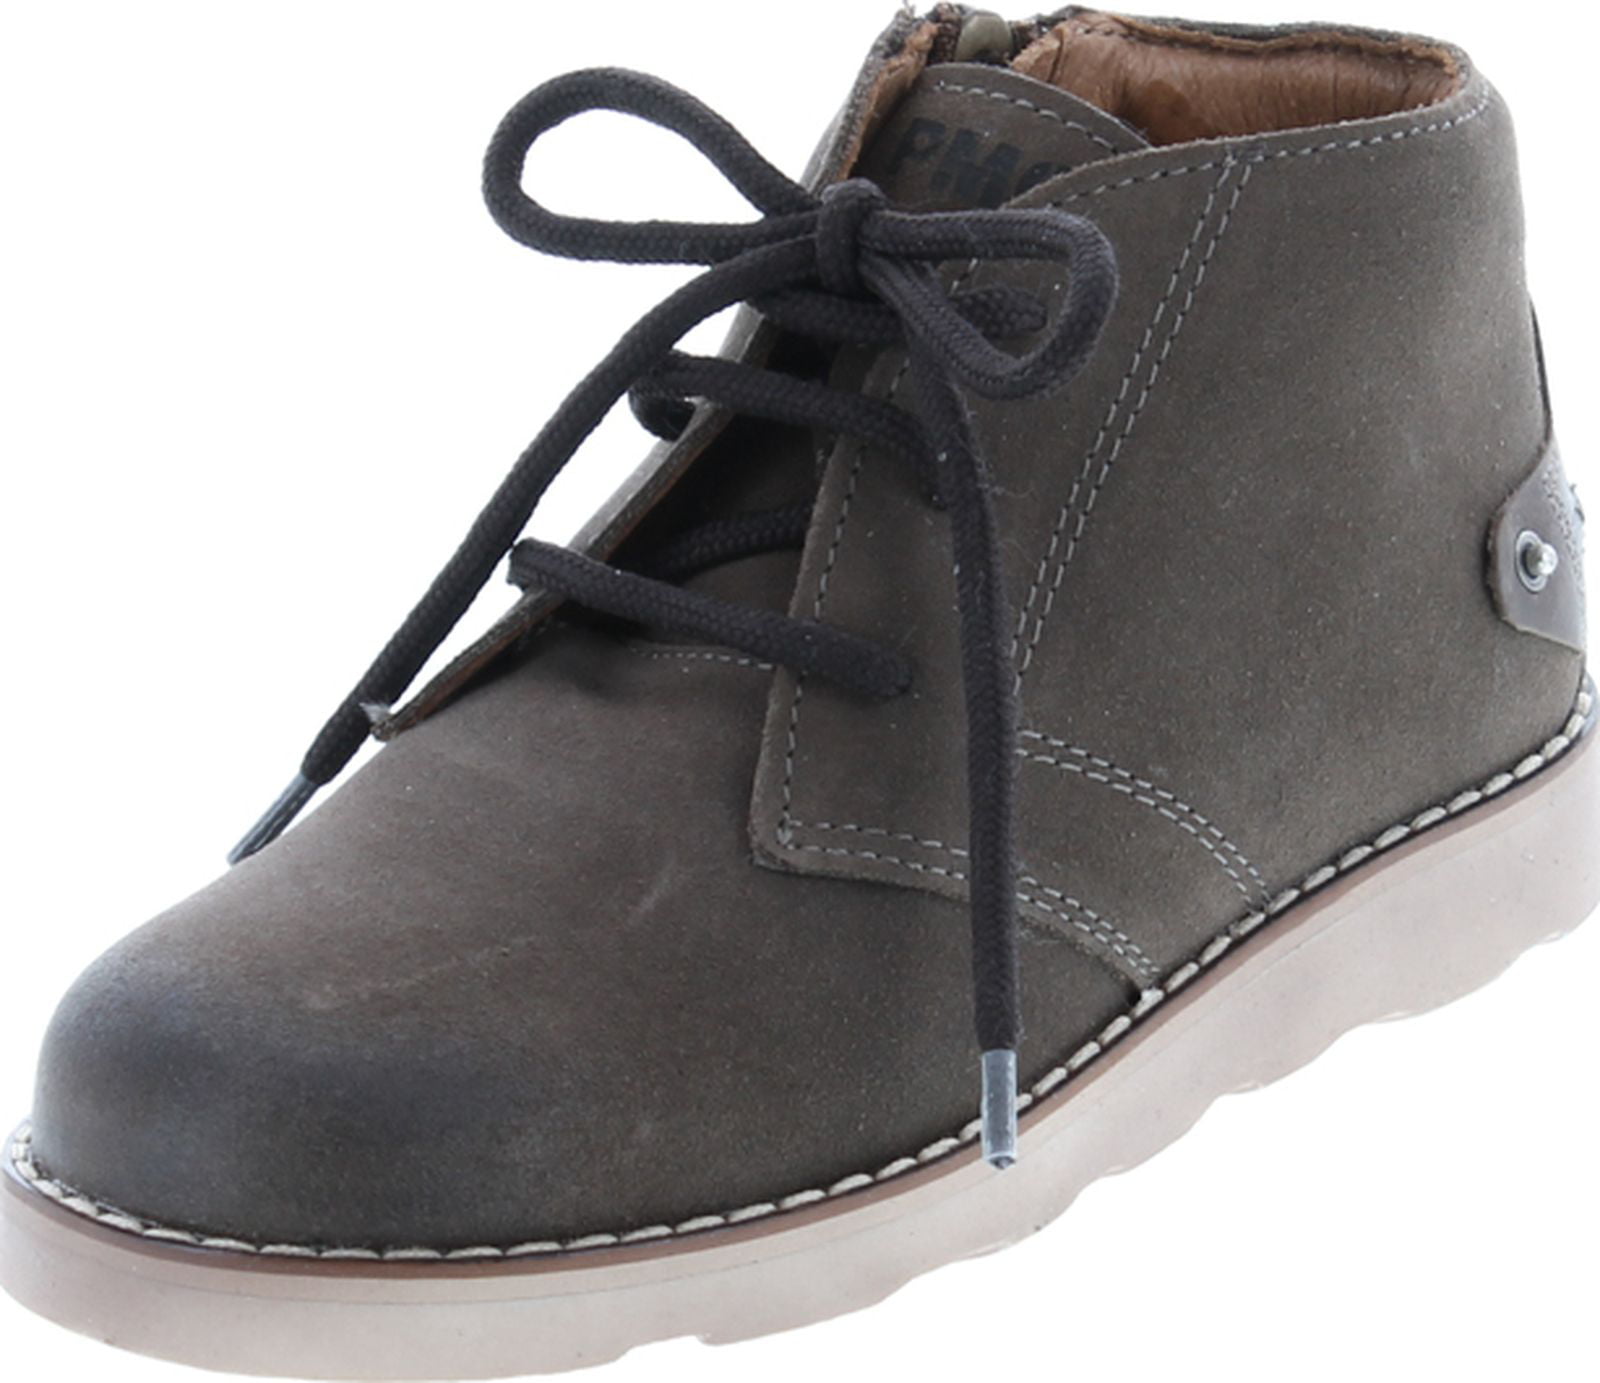 Simone Boys Pc329 Made in Italy Lace Up Casual Booties